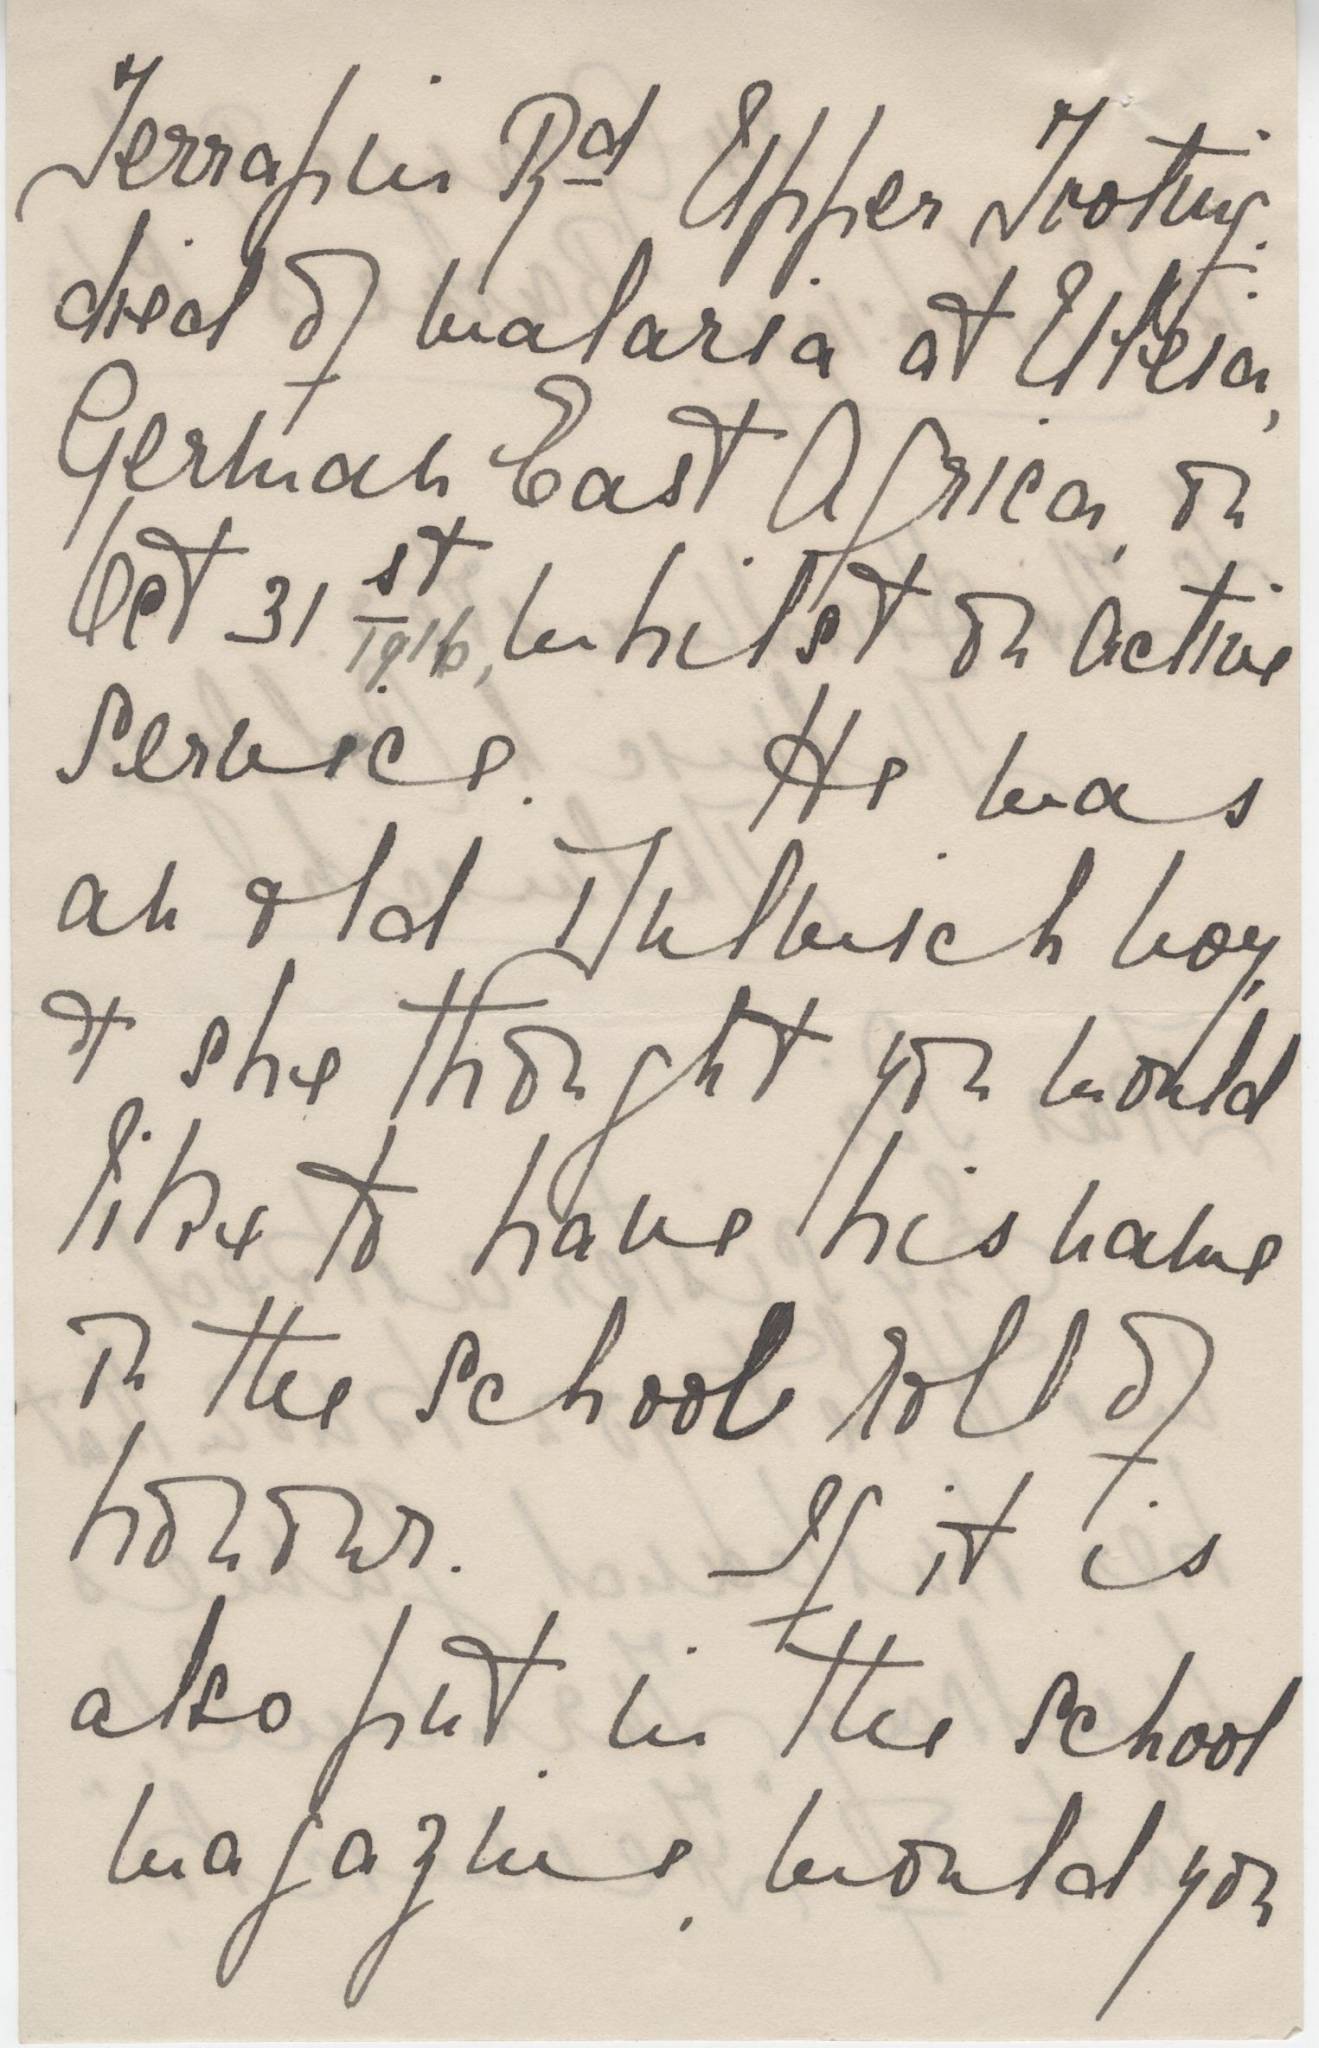 Turnbull JL First Sister In Law Letter 2